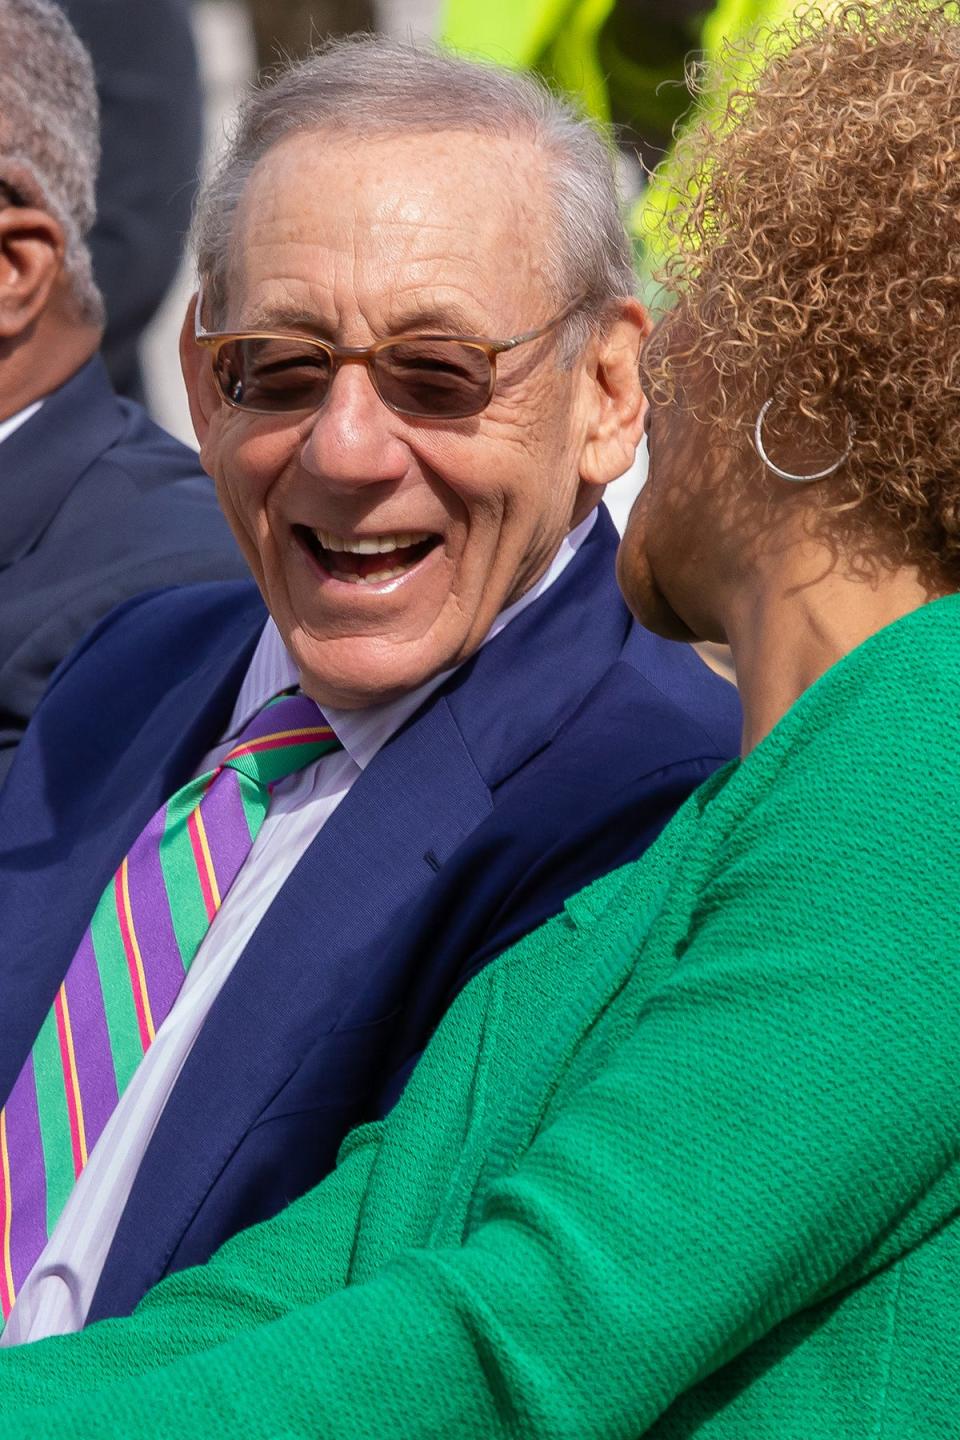 Real estate mogul and Miami Dolphins owner Stephen Ross announced Monday, Dec. 11 that he is giving $8 million to help West Palm Beach's children prepare for and attend college.